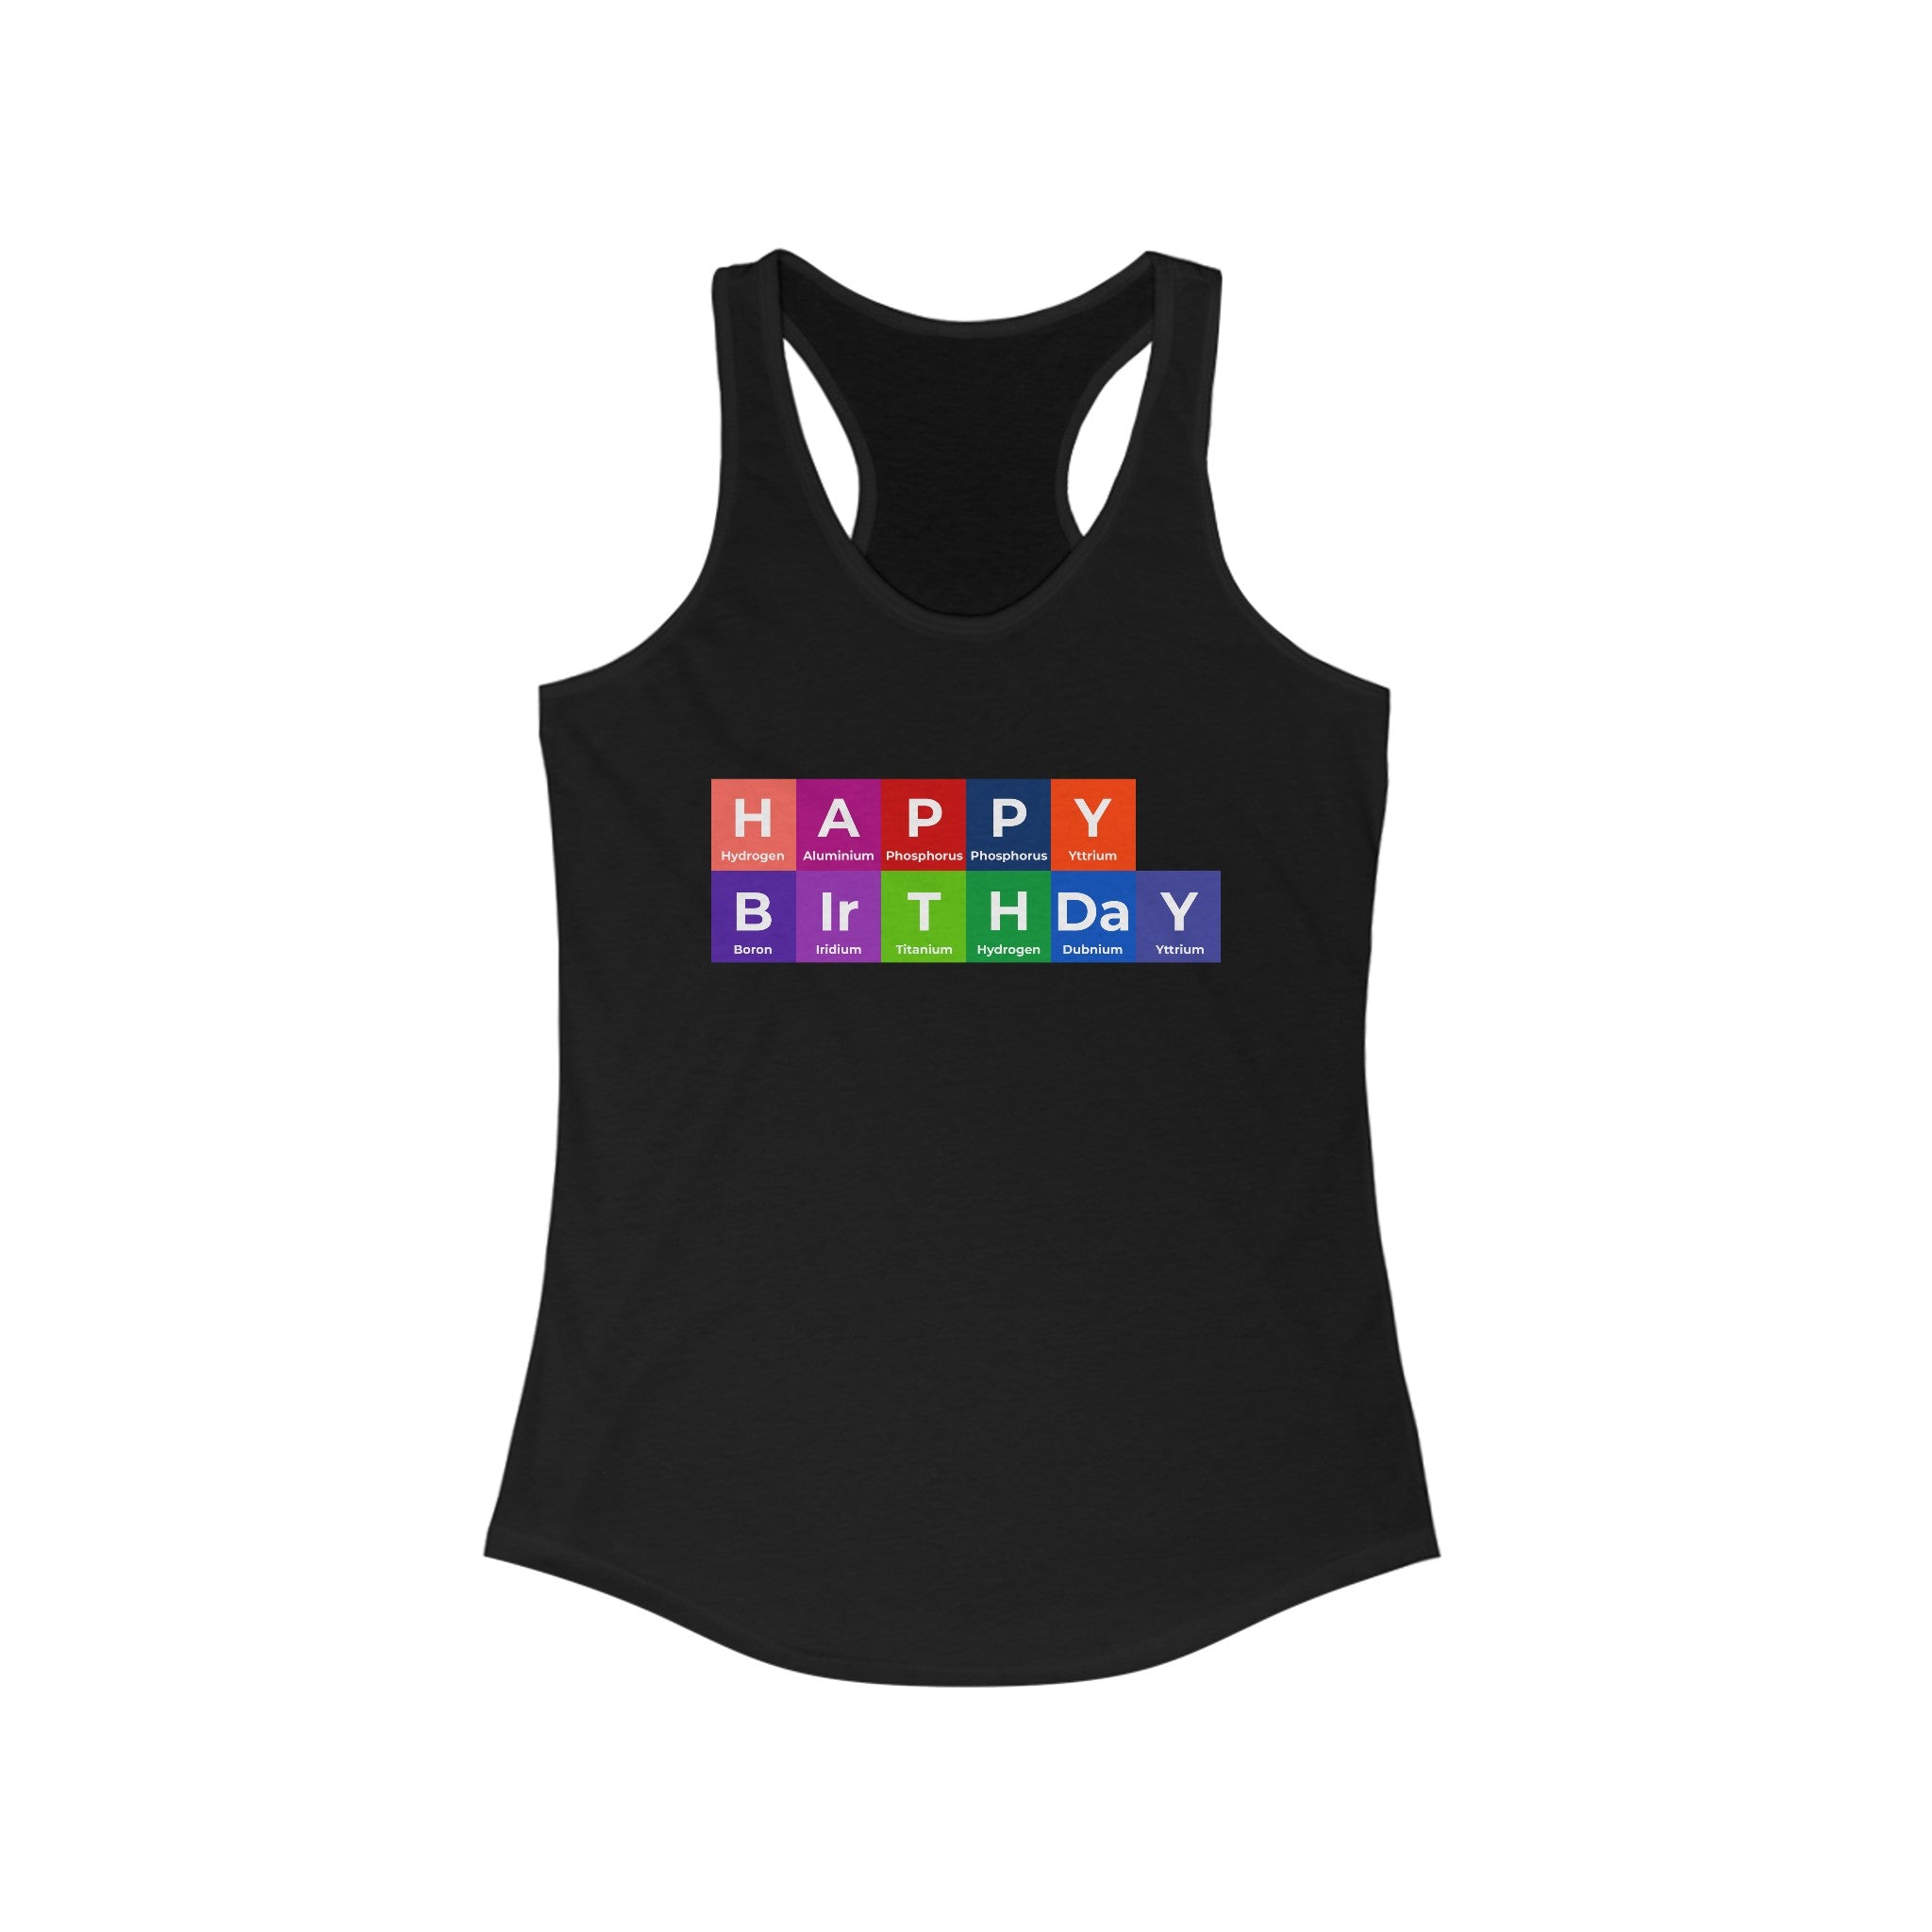 Happy Birthday - Women's Racerback Tank featuring "HAPPY BIRTHDAY" spelled out using colorful blocks resembling elements from the periodic table, perfect for everyday wear or birthday celebrations.